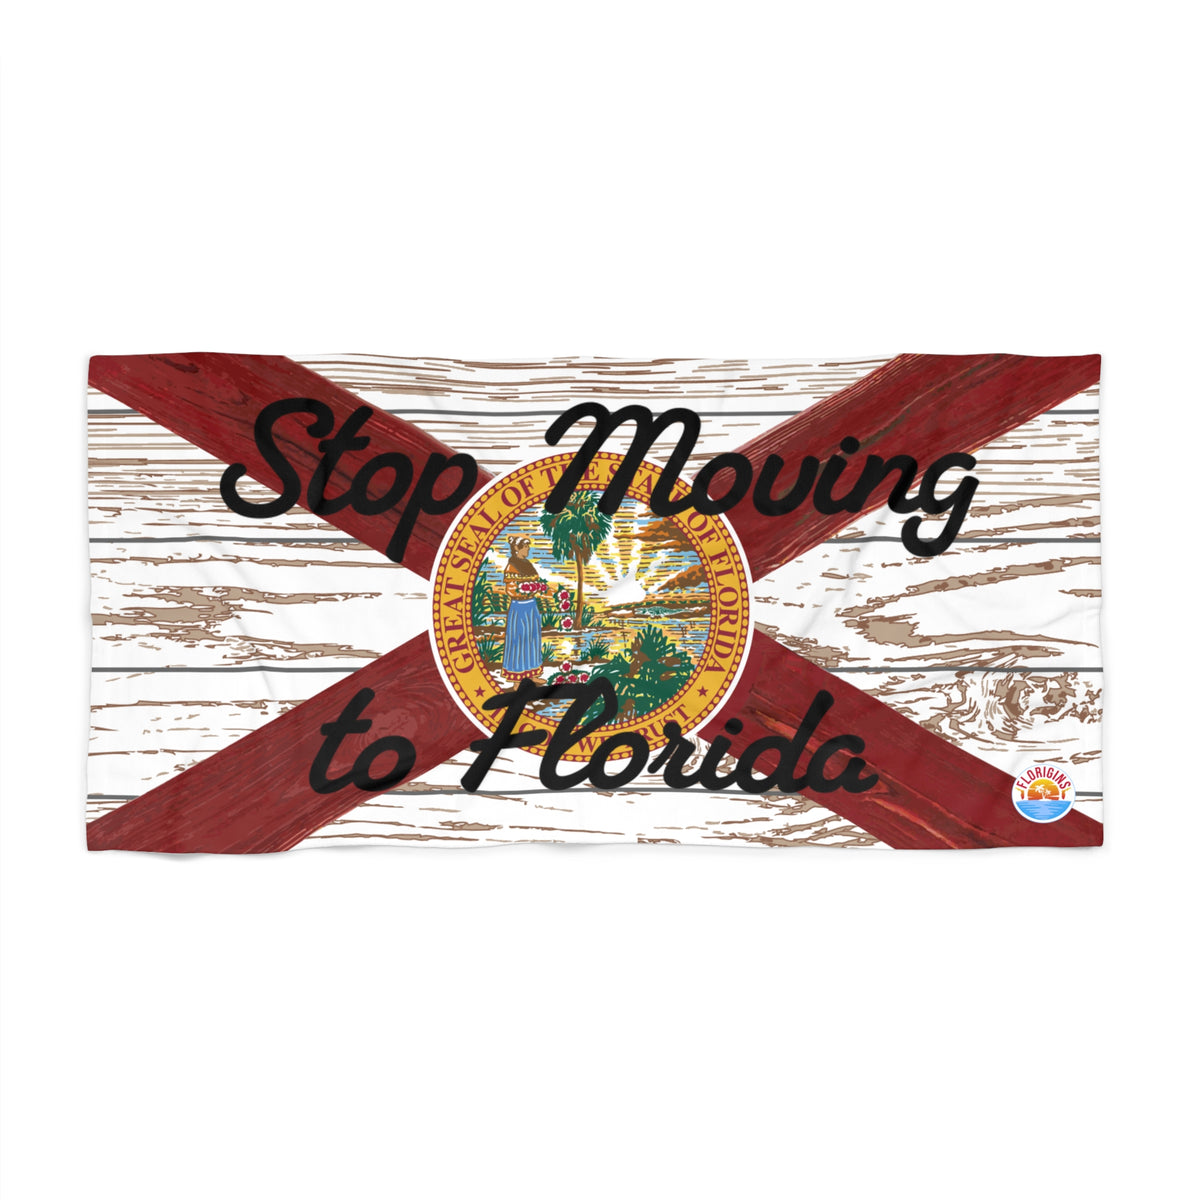 Stop Moving to Florida (FloridaMan) Heavyweight Luxury Beach Towels